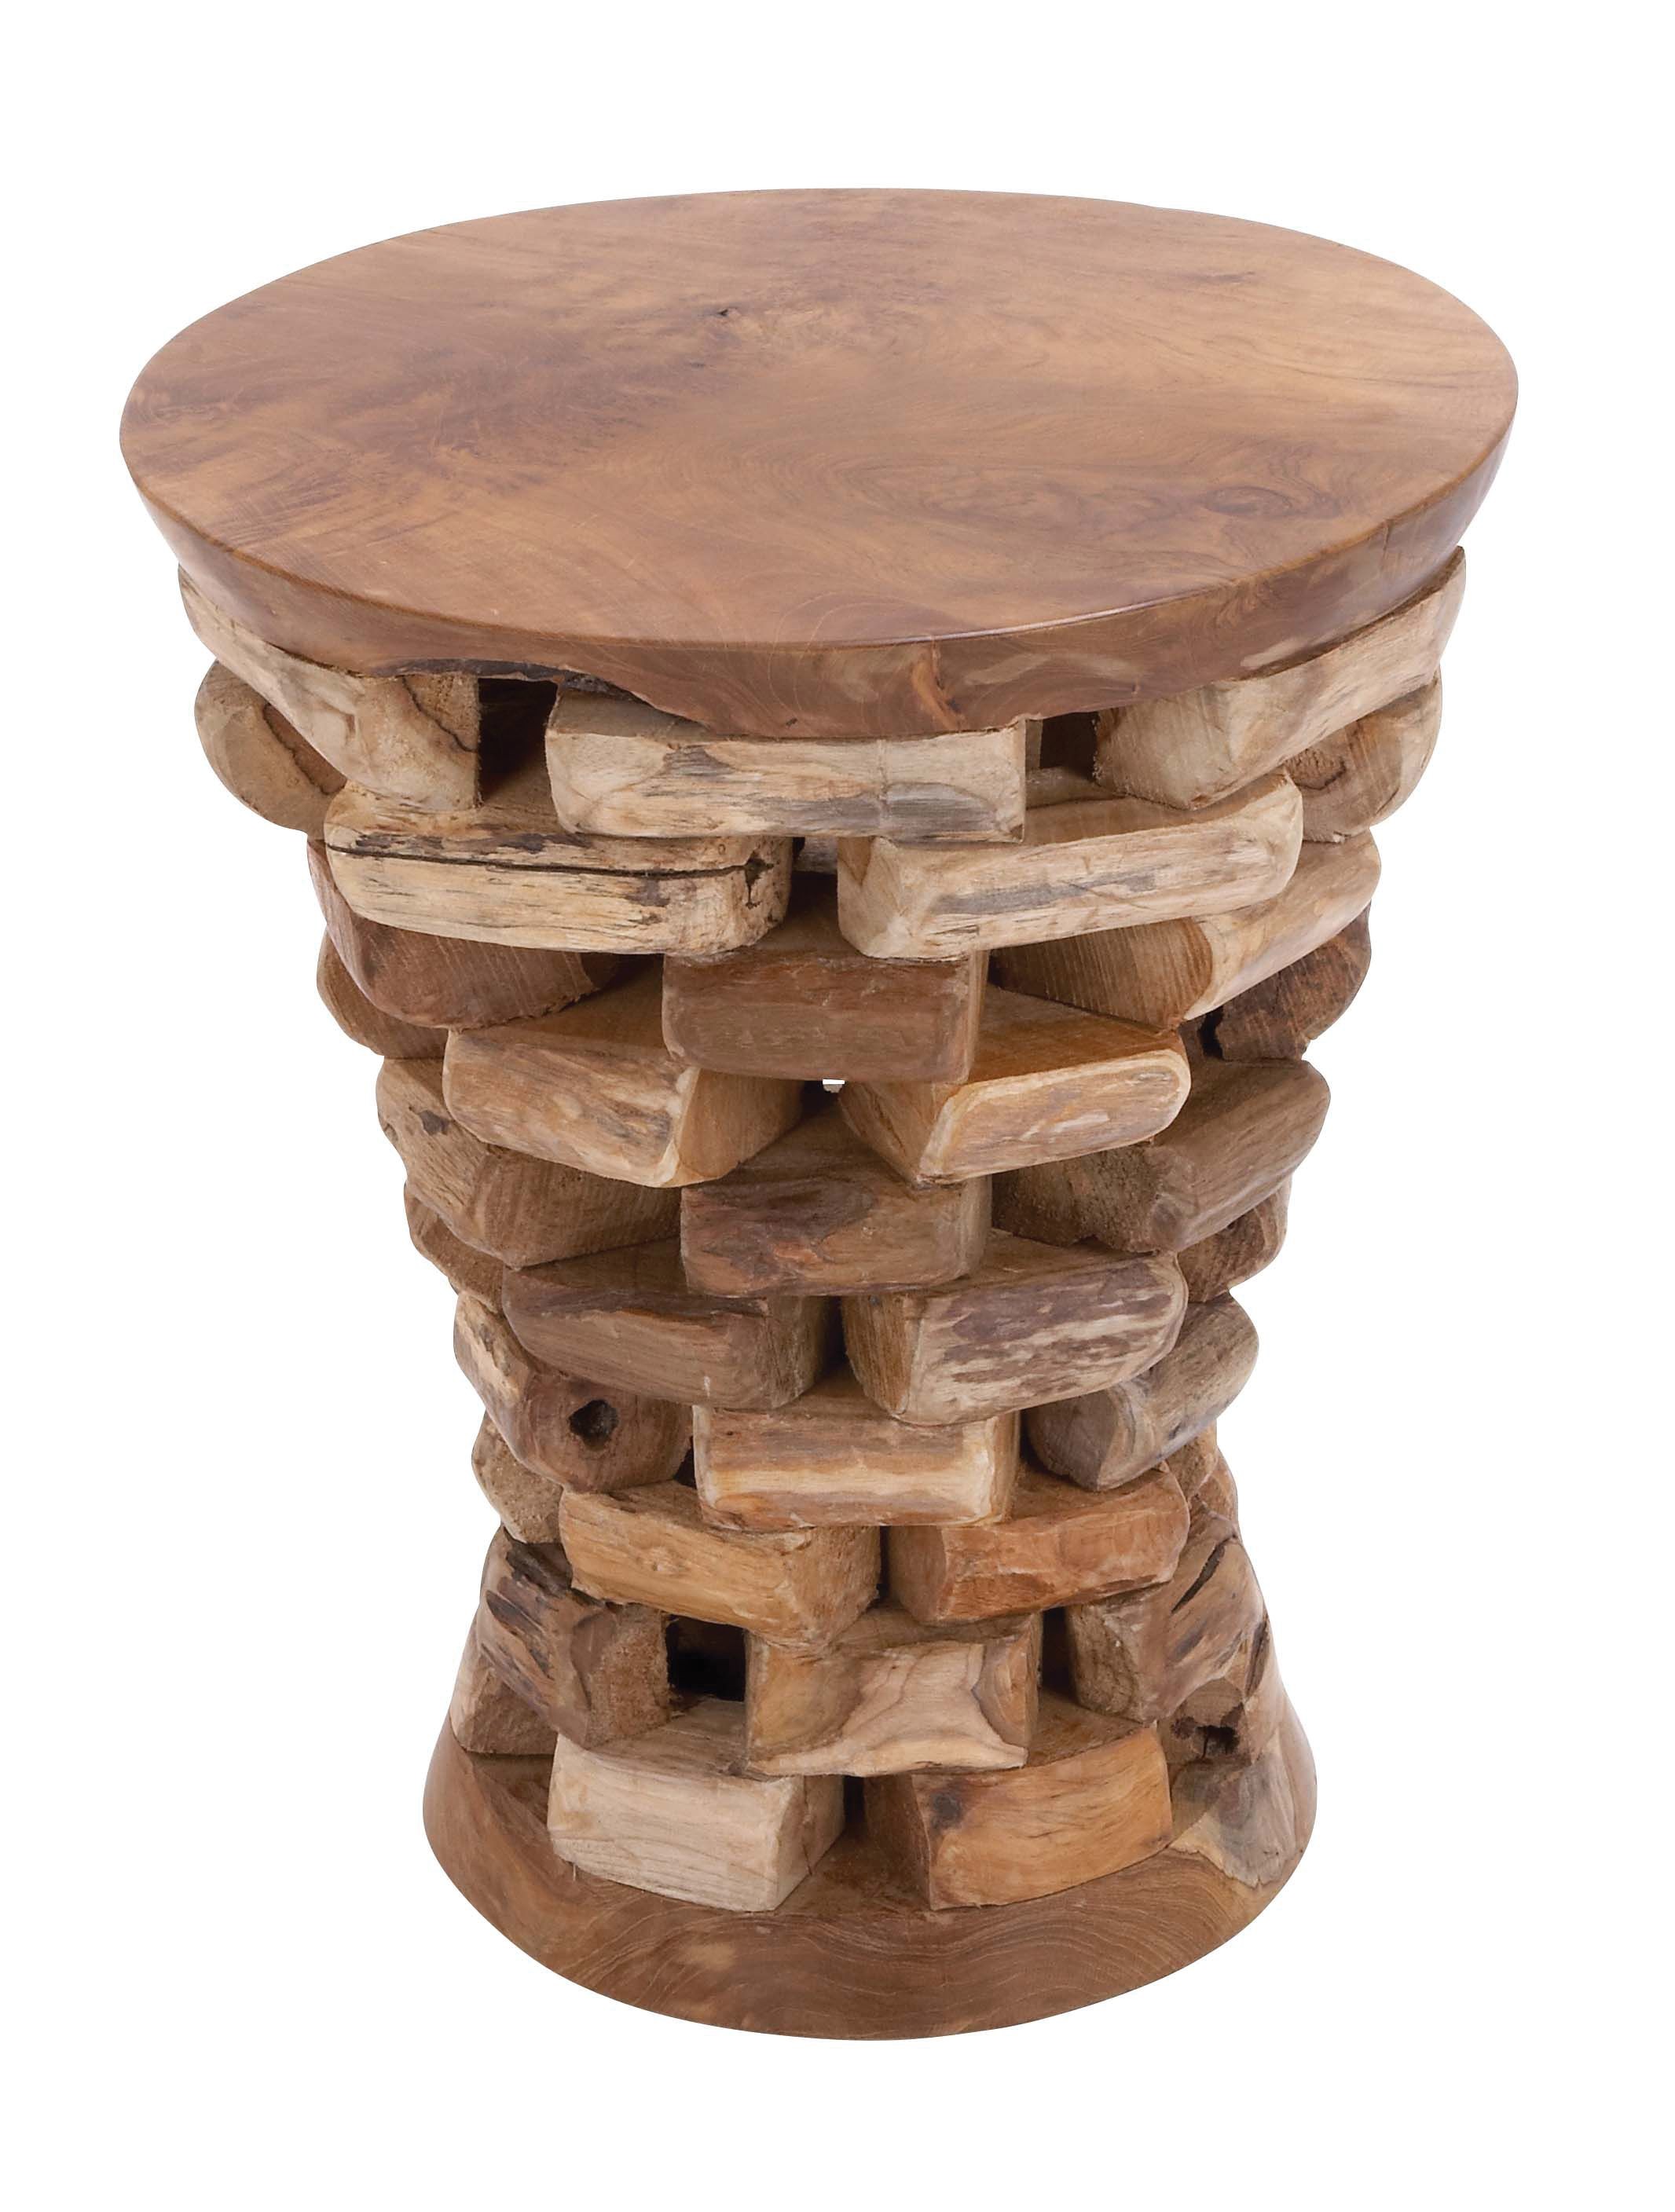 cool table legs probably perfect fun drum shaped end gallery round wood accent with industrial lovable sofa set designs for living room engine coffee small marble lift top low